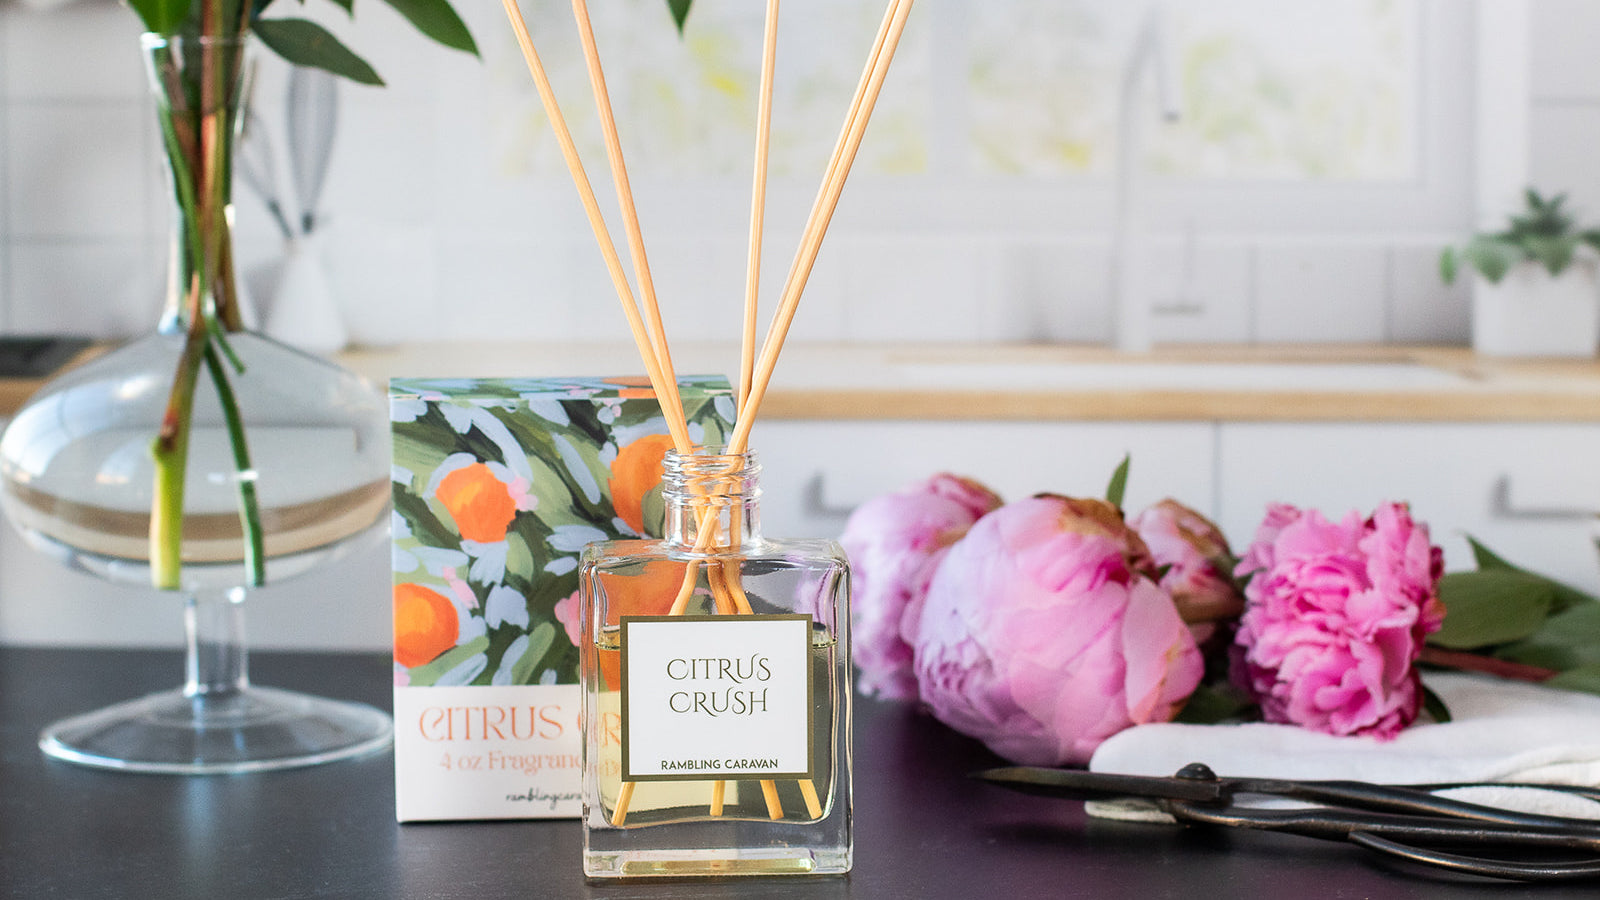 Citrus crush reed diffuser in a kitchen with flowers.